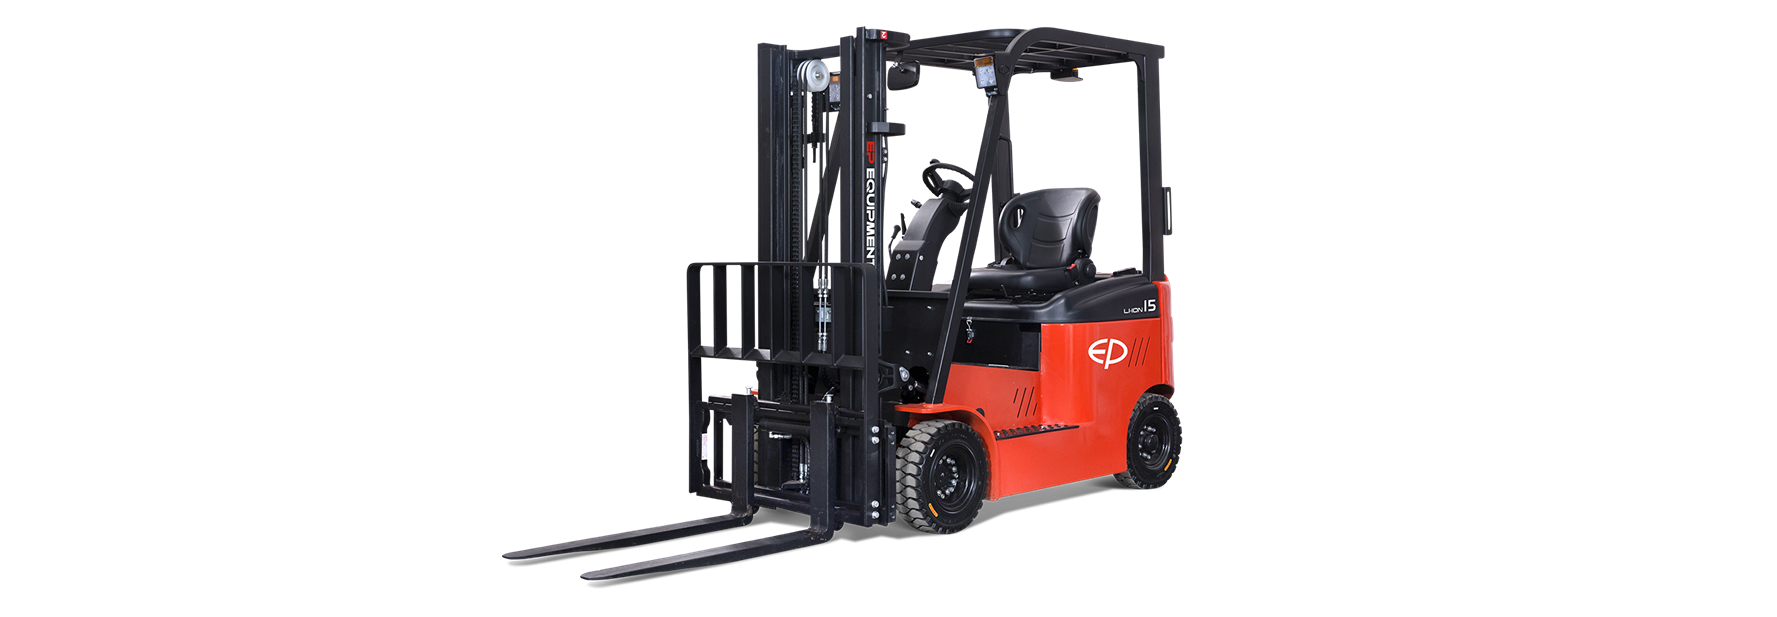 CPD15L1 Electric Forklift